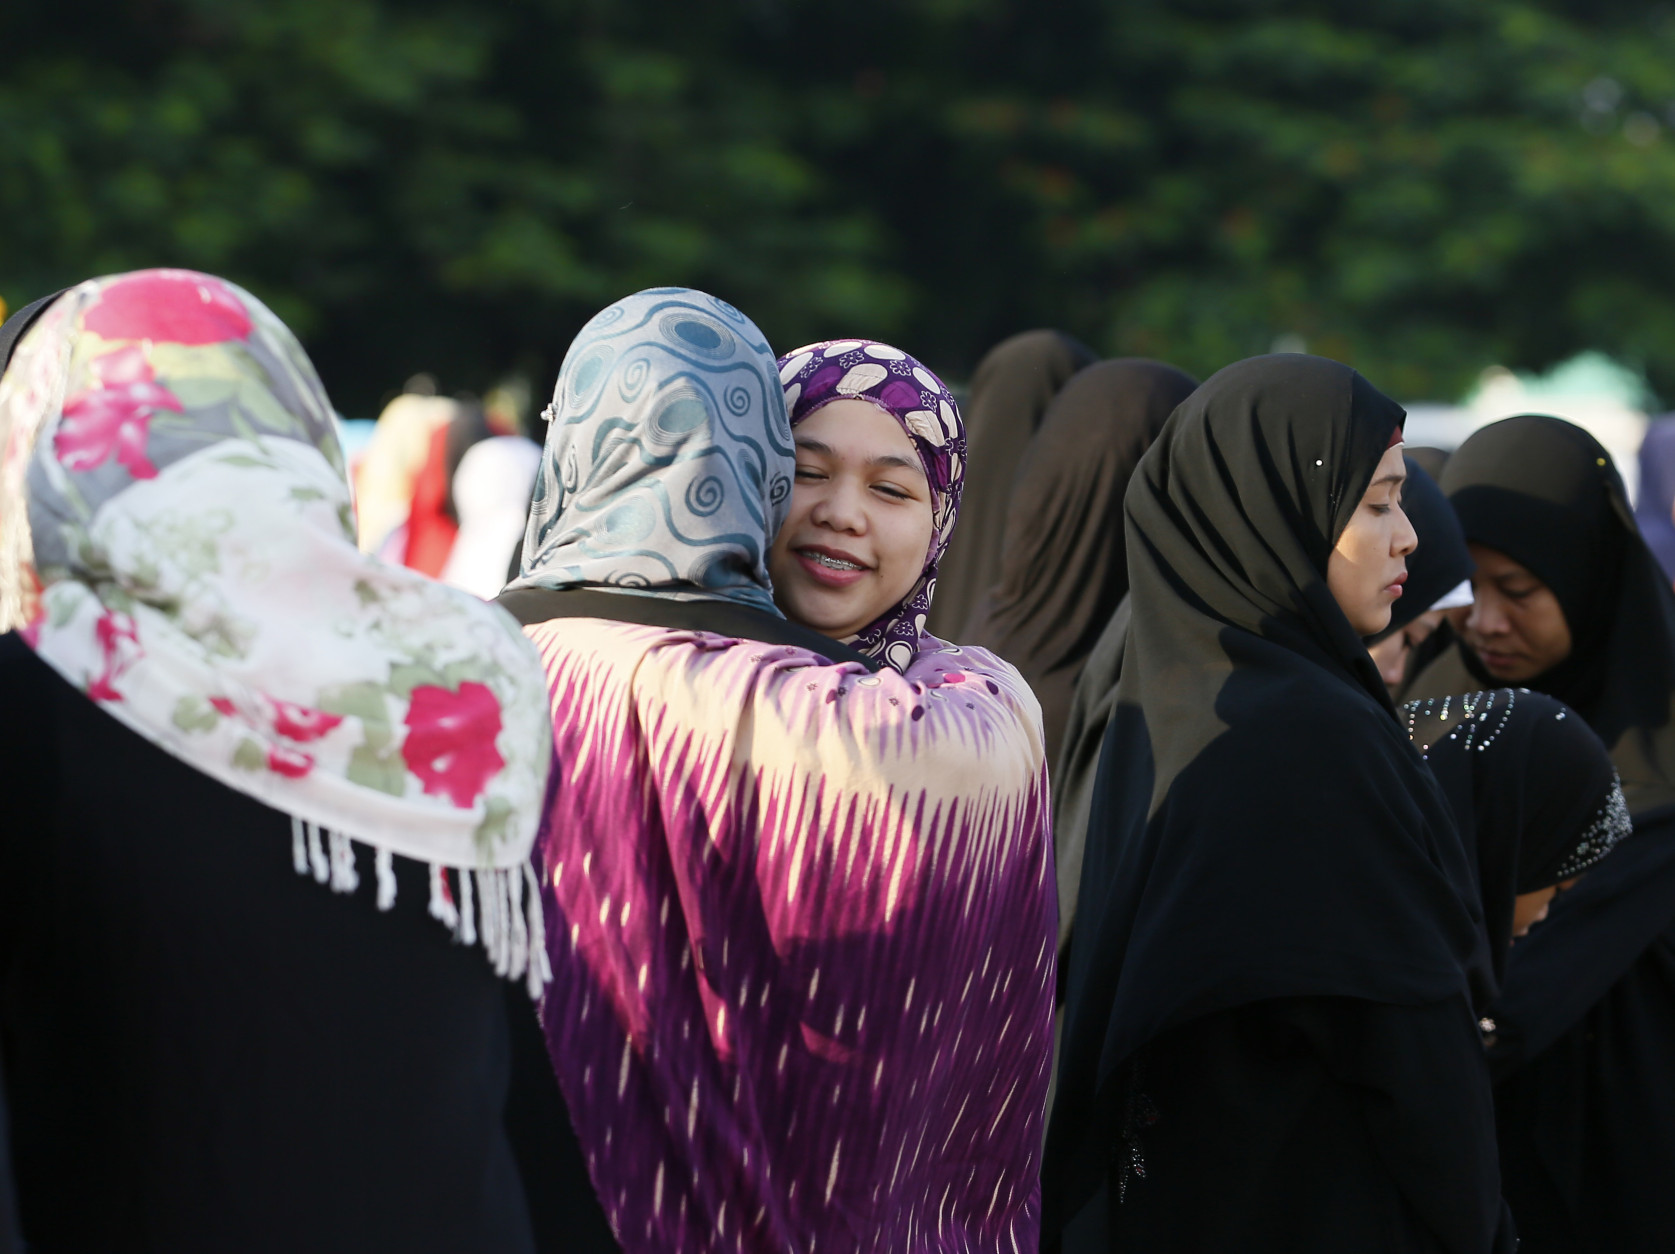 Muslims greet each other as they gather for prayer to mark the end of the holy month of Ramadan known as Eid al Fitr, Wednesday, July 6, 2016 in Manila, Philippines. The Eid, one of the most important holidays in the Muslim world, is celebrated with prayers, picnics and family reunions. (AP Photo/Bullit Marquez)